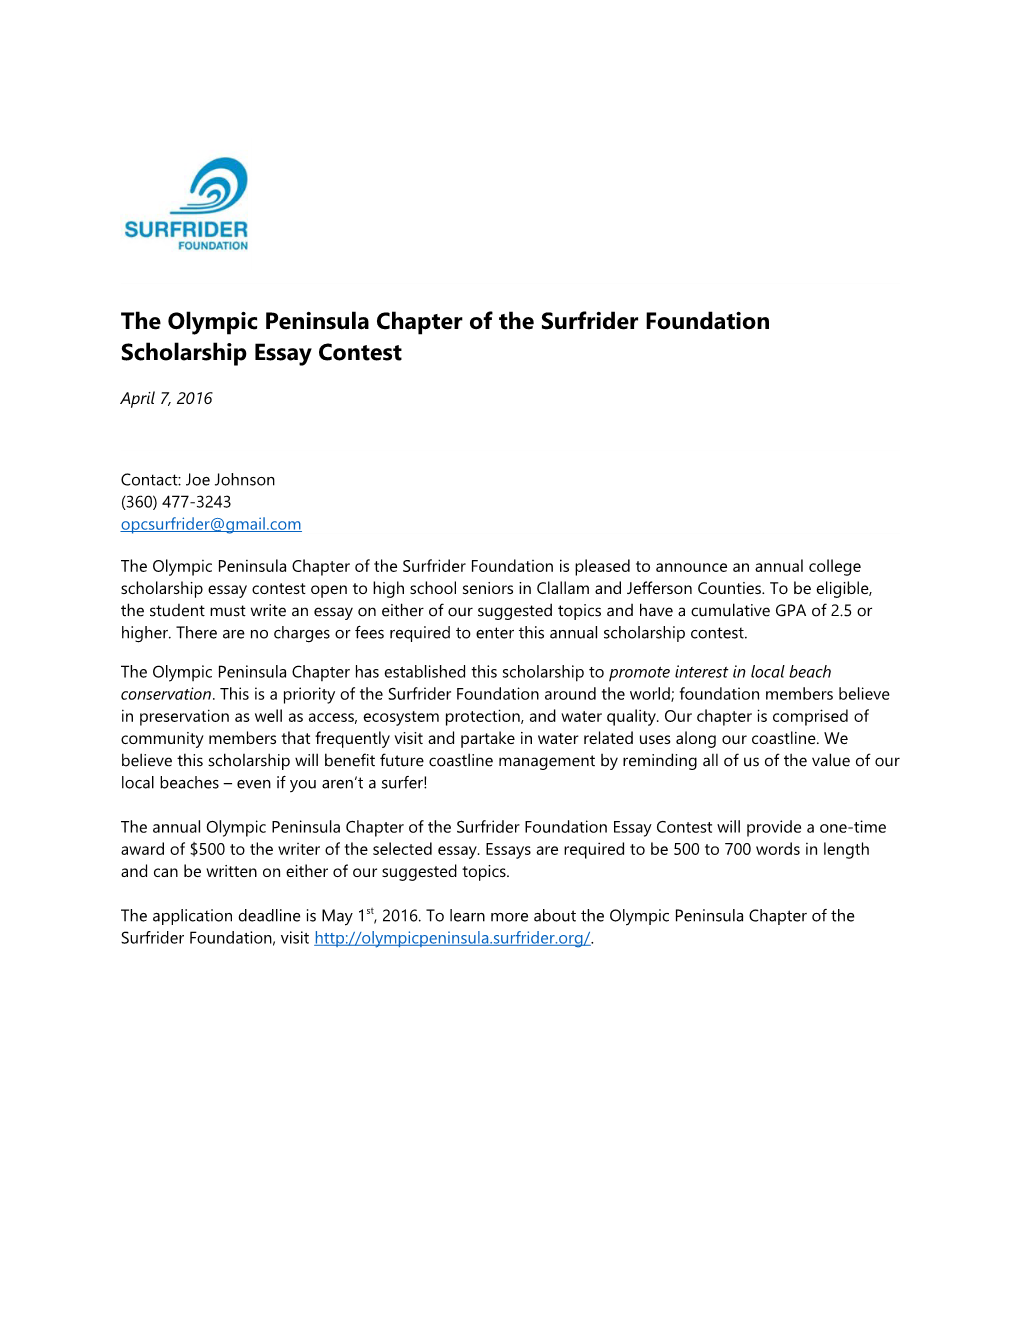 The Olympic Peninsula Chapter of the Surfrider Foundation Scholarship Essay Contest